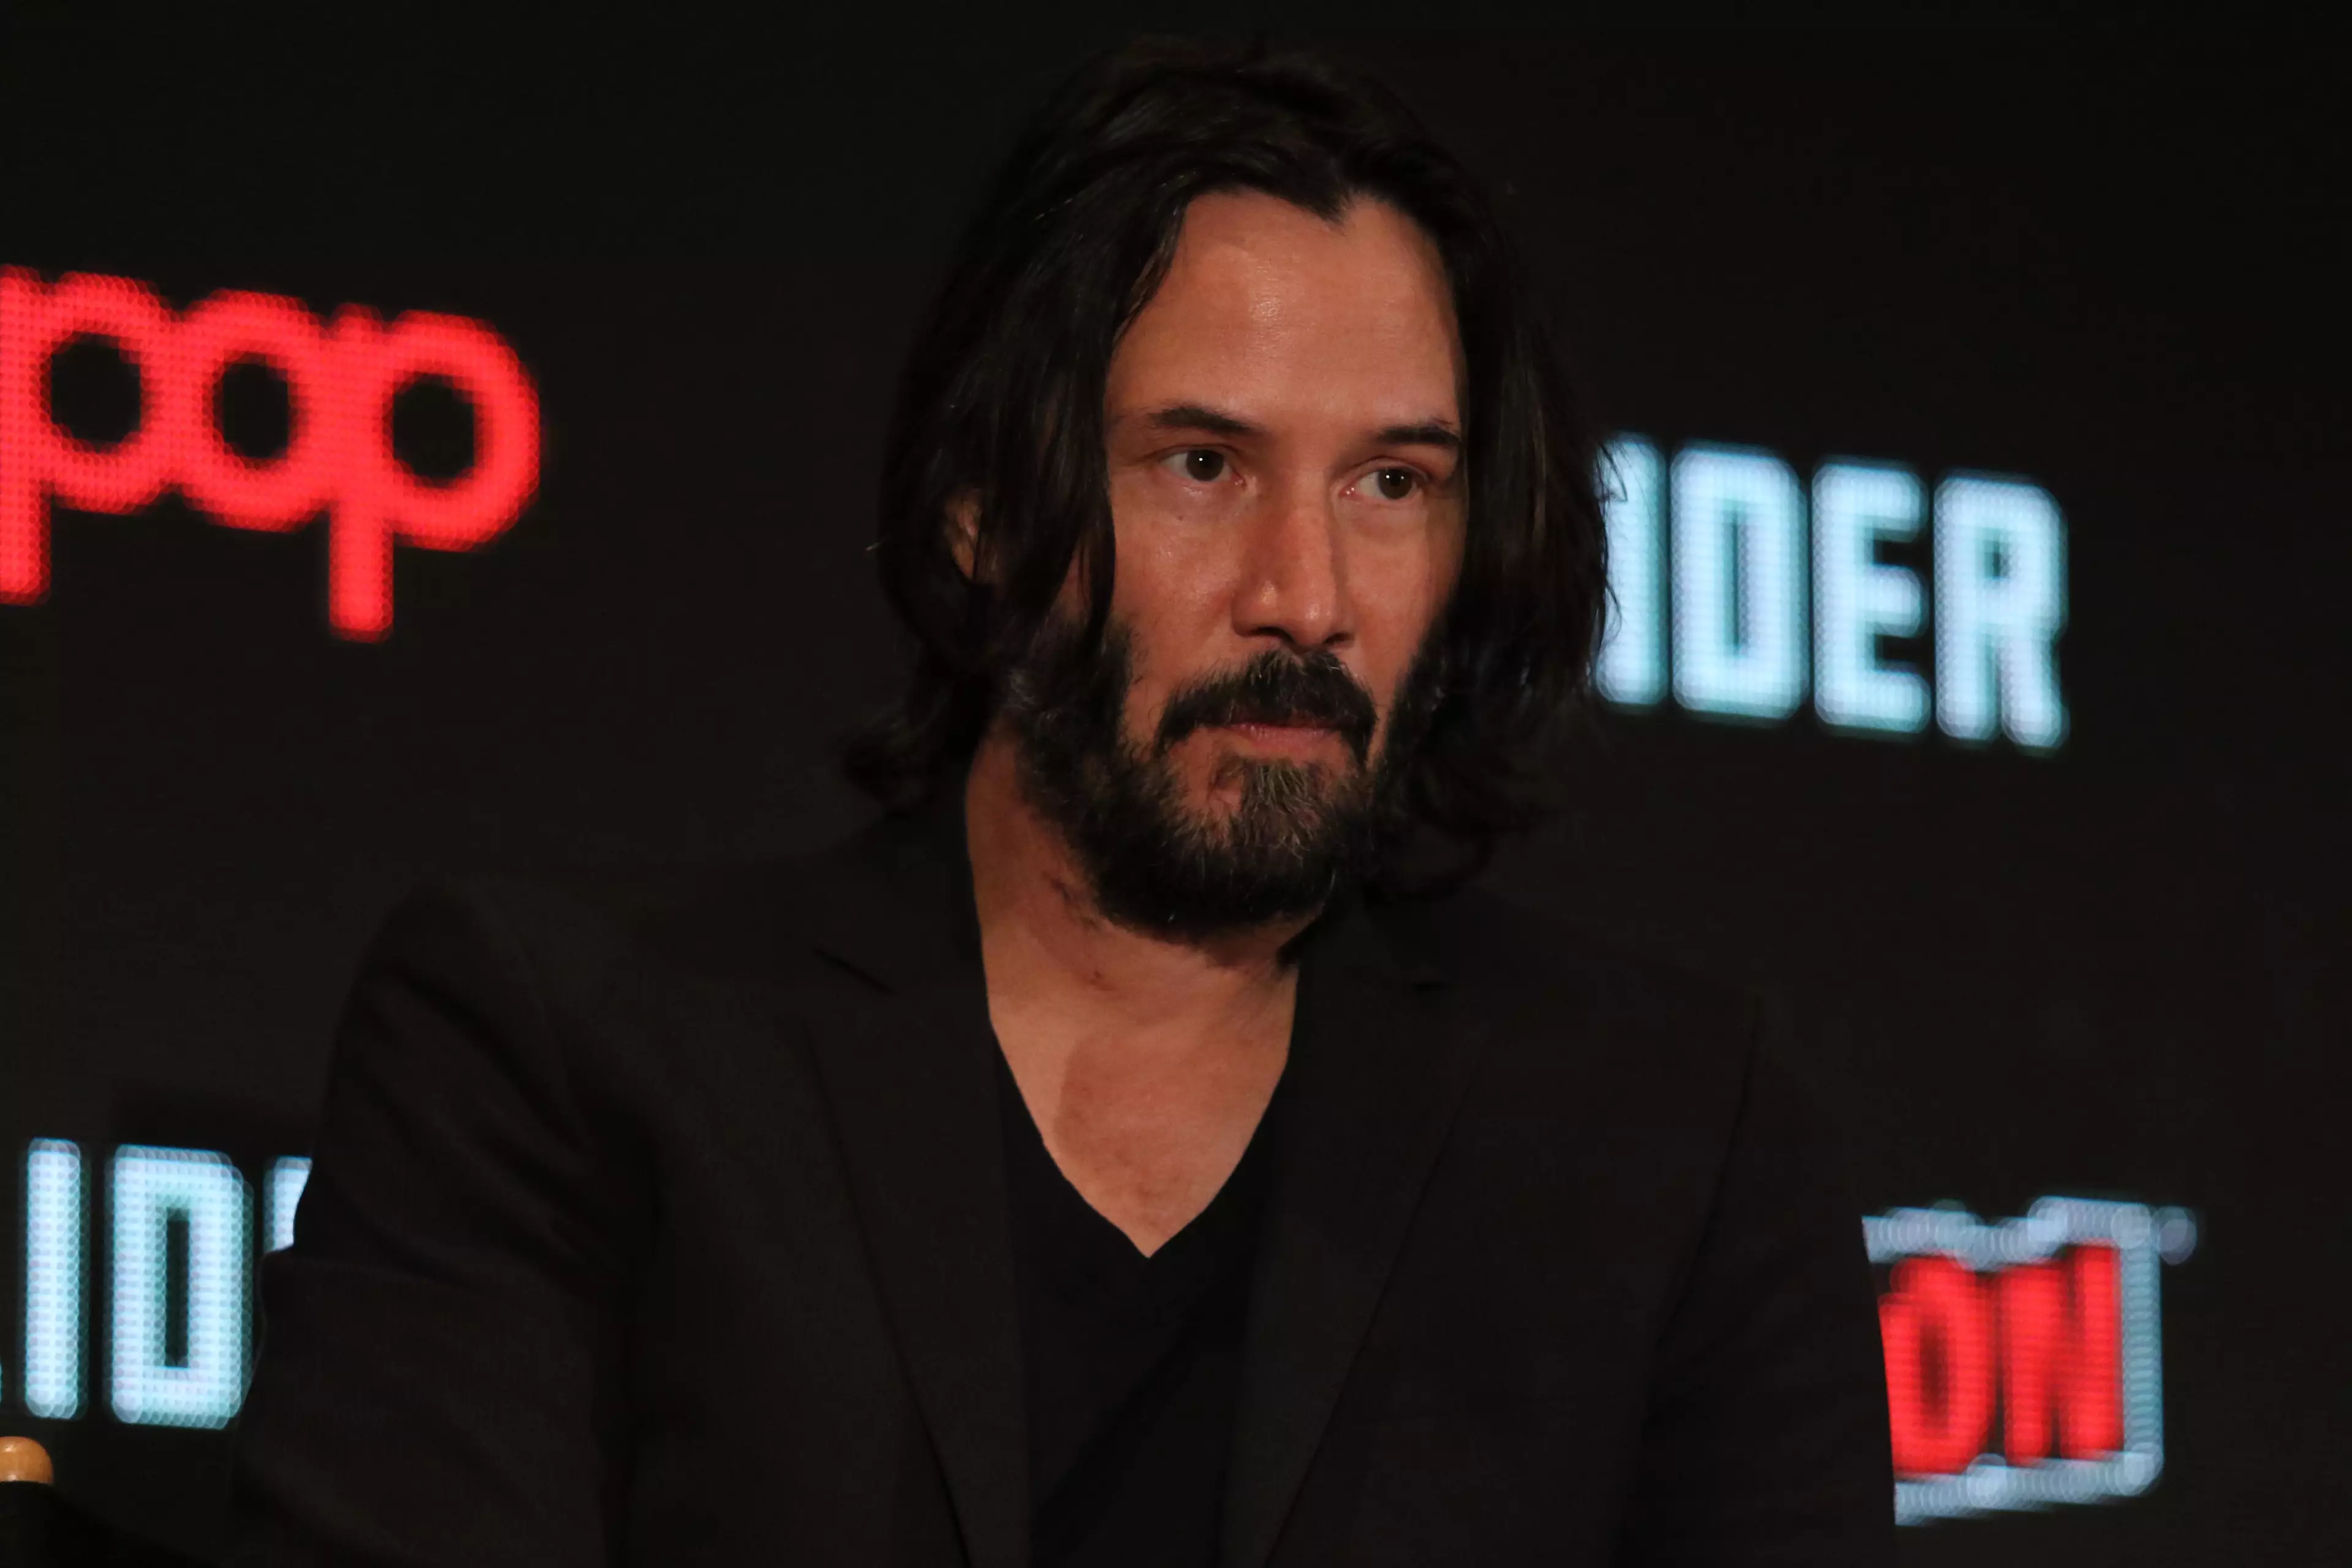 The 'John Wick' star admitted he would love to play Wolverine.